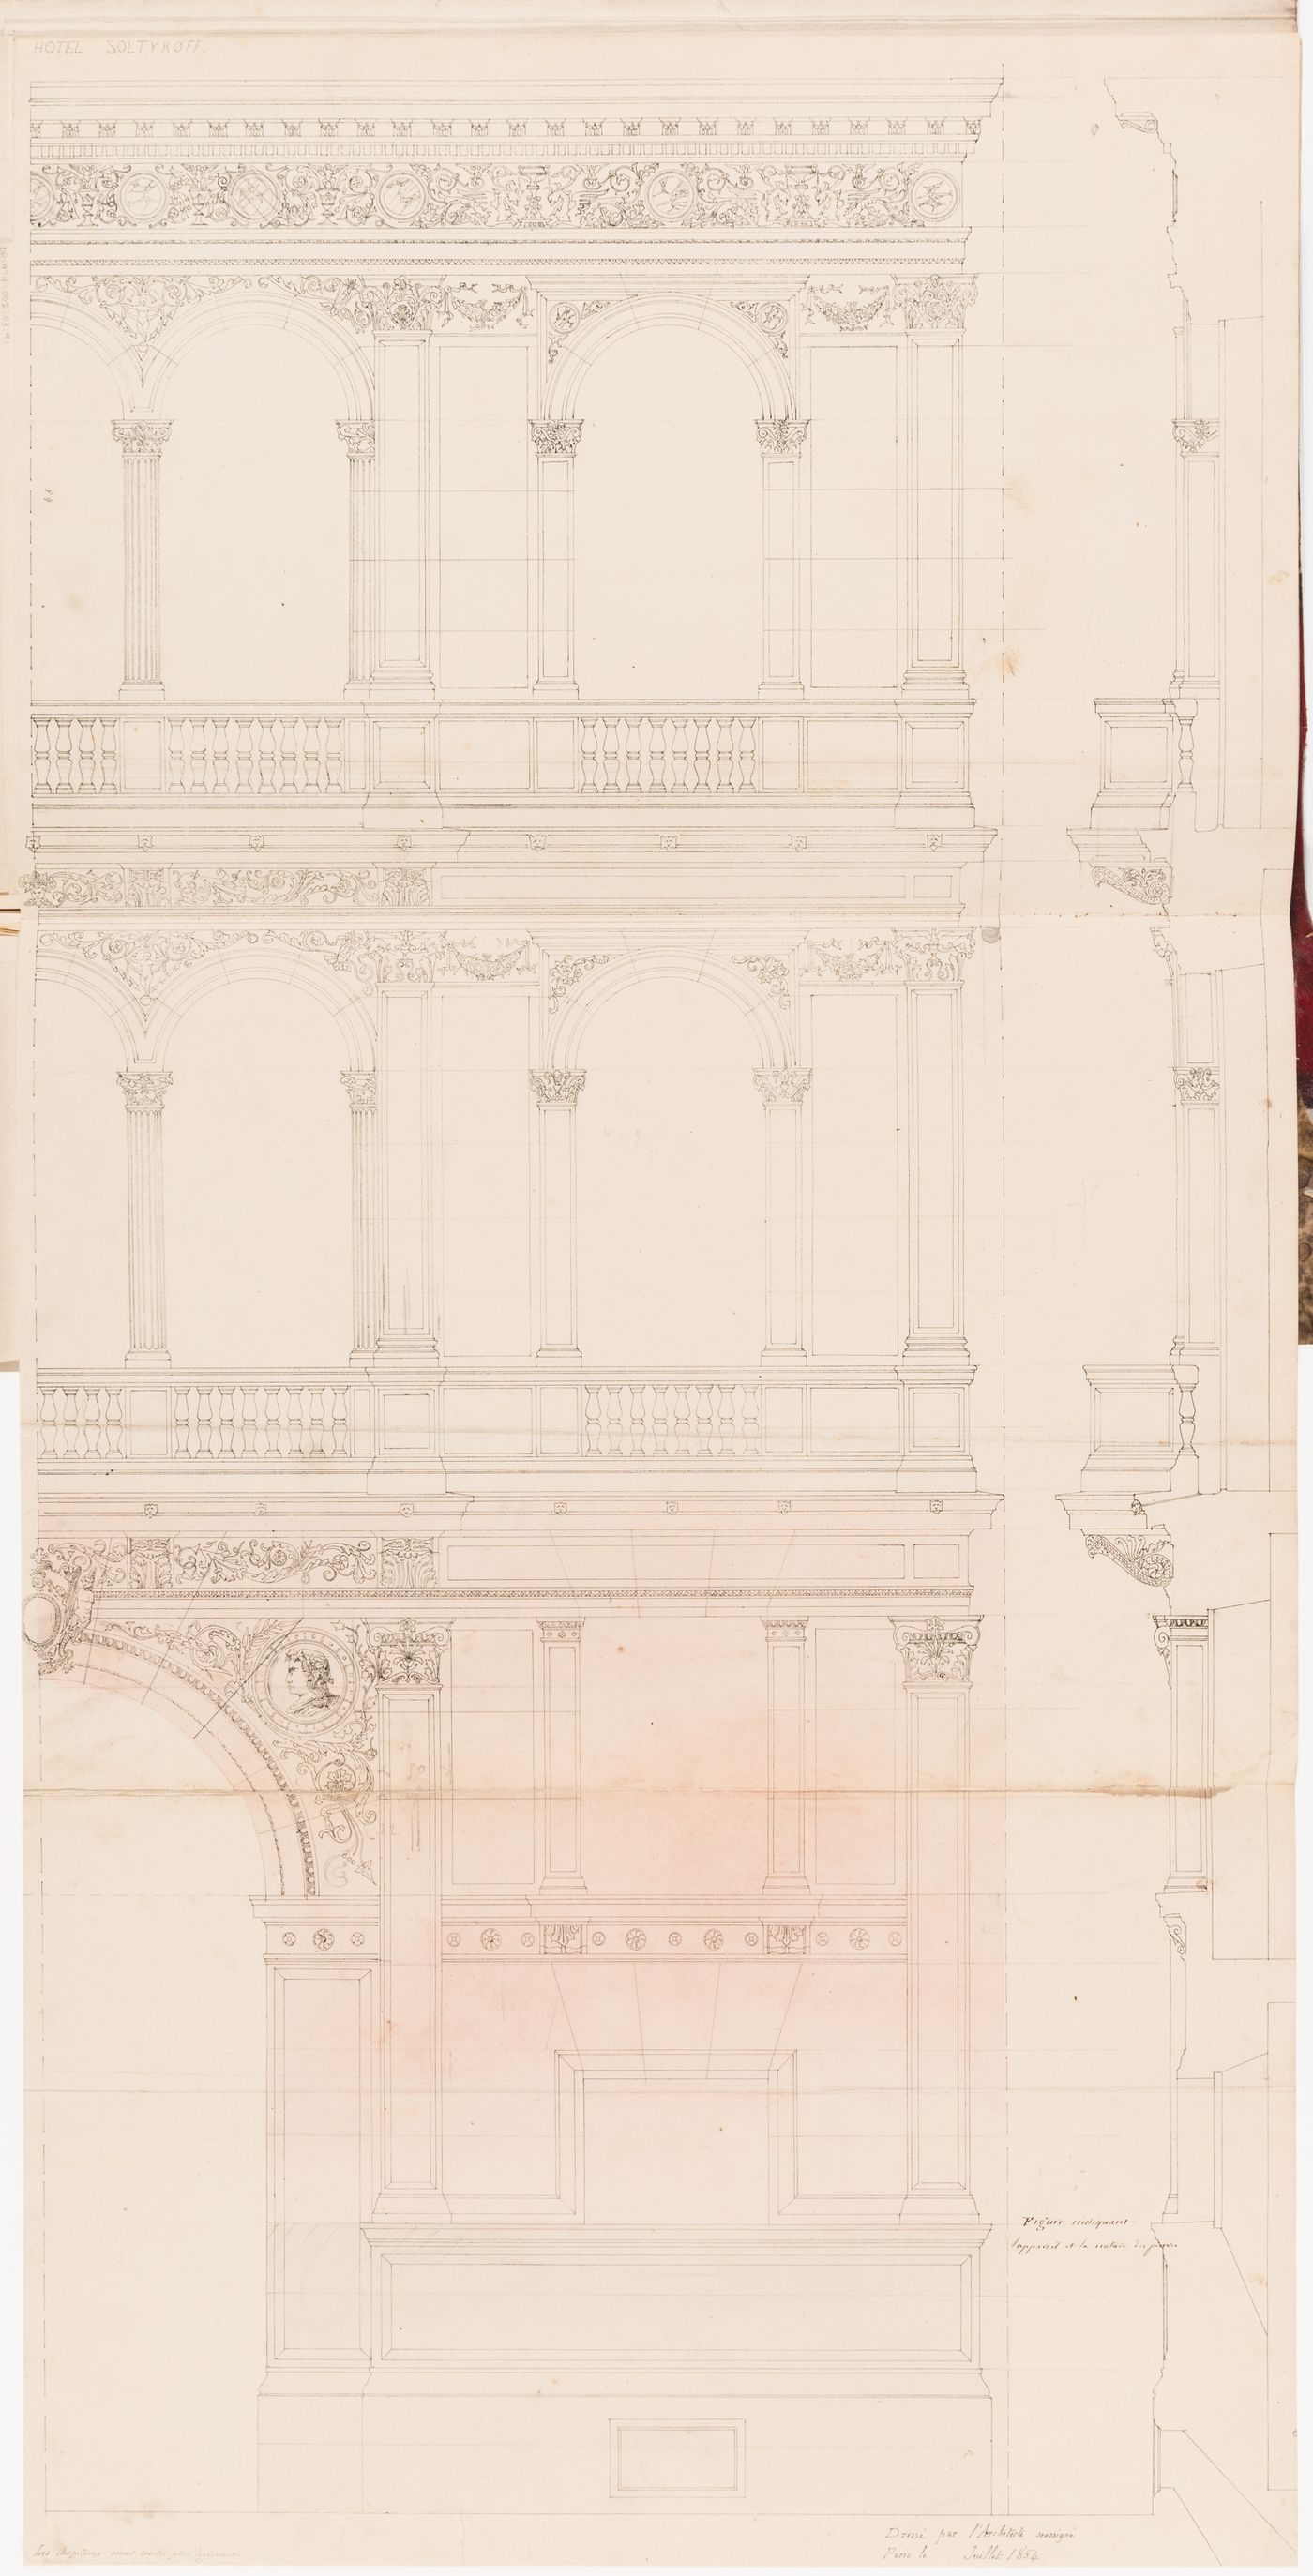 Half elevation and wall section for the principal façade indicating the type and finish of the stone, Hôtel Soltykoff